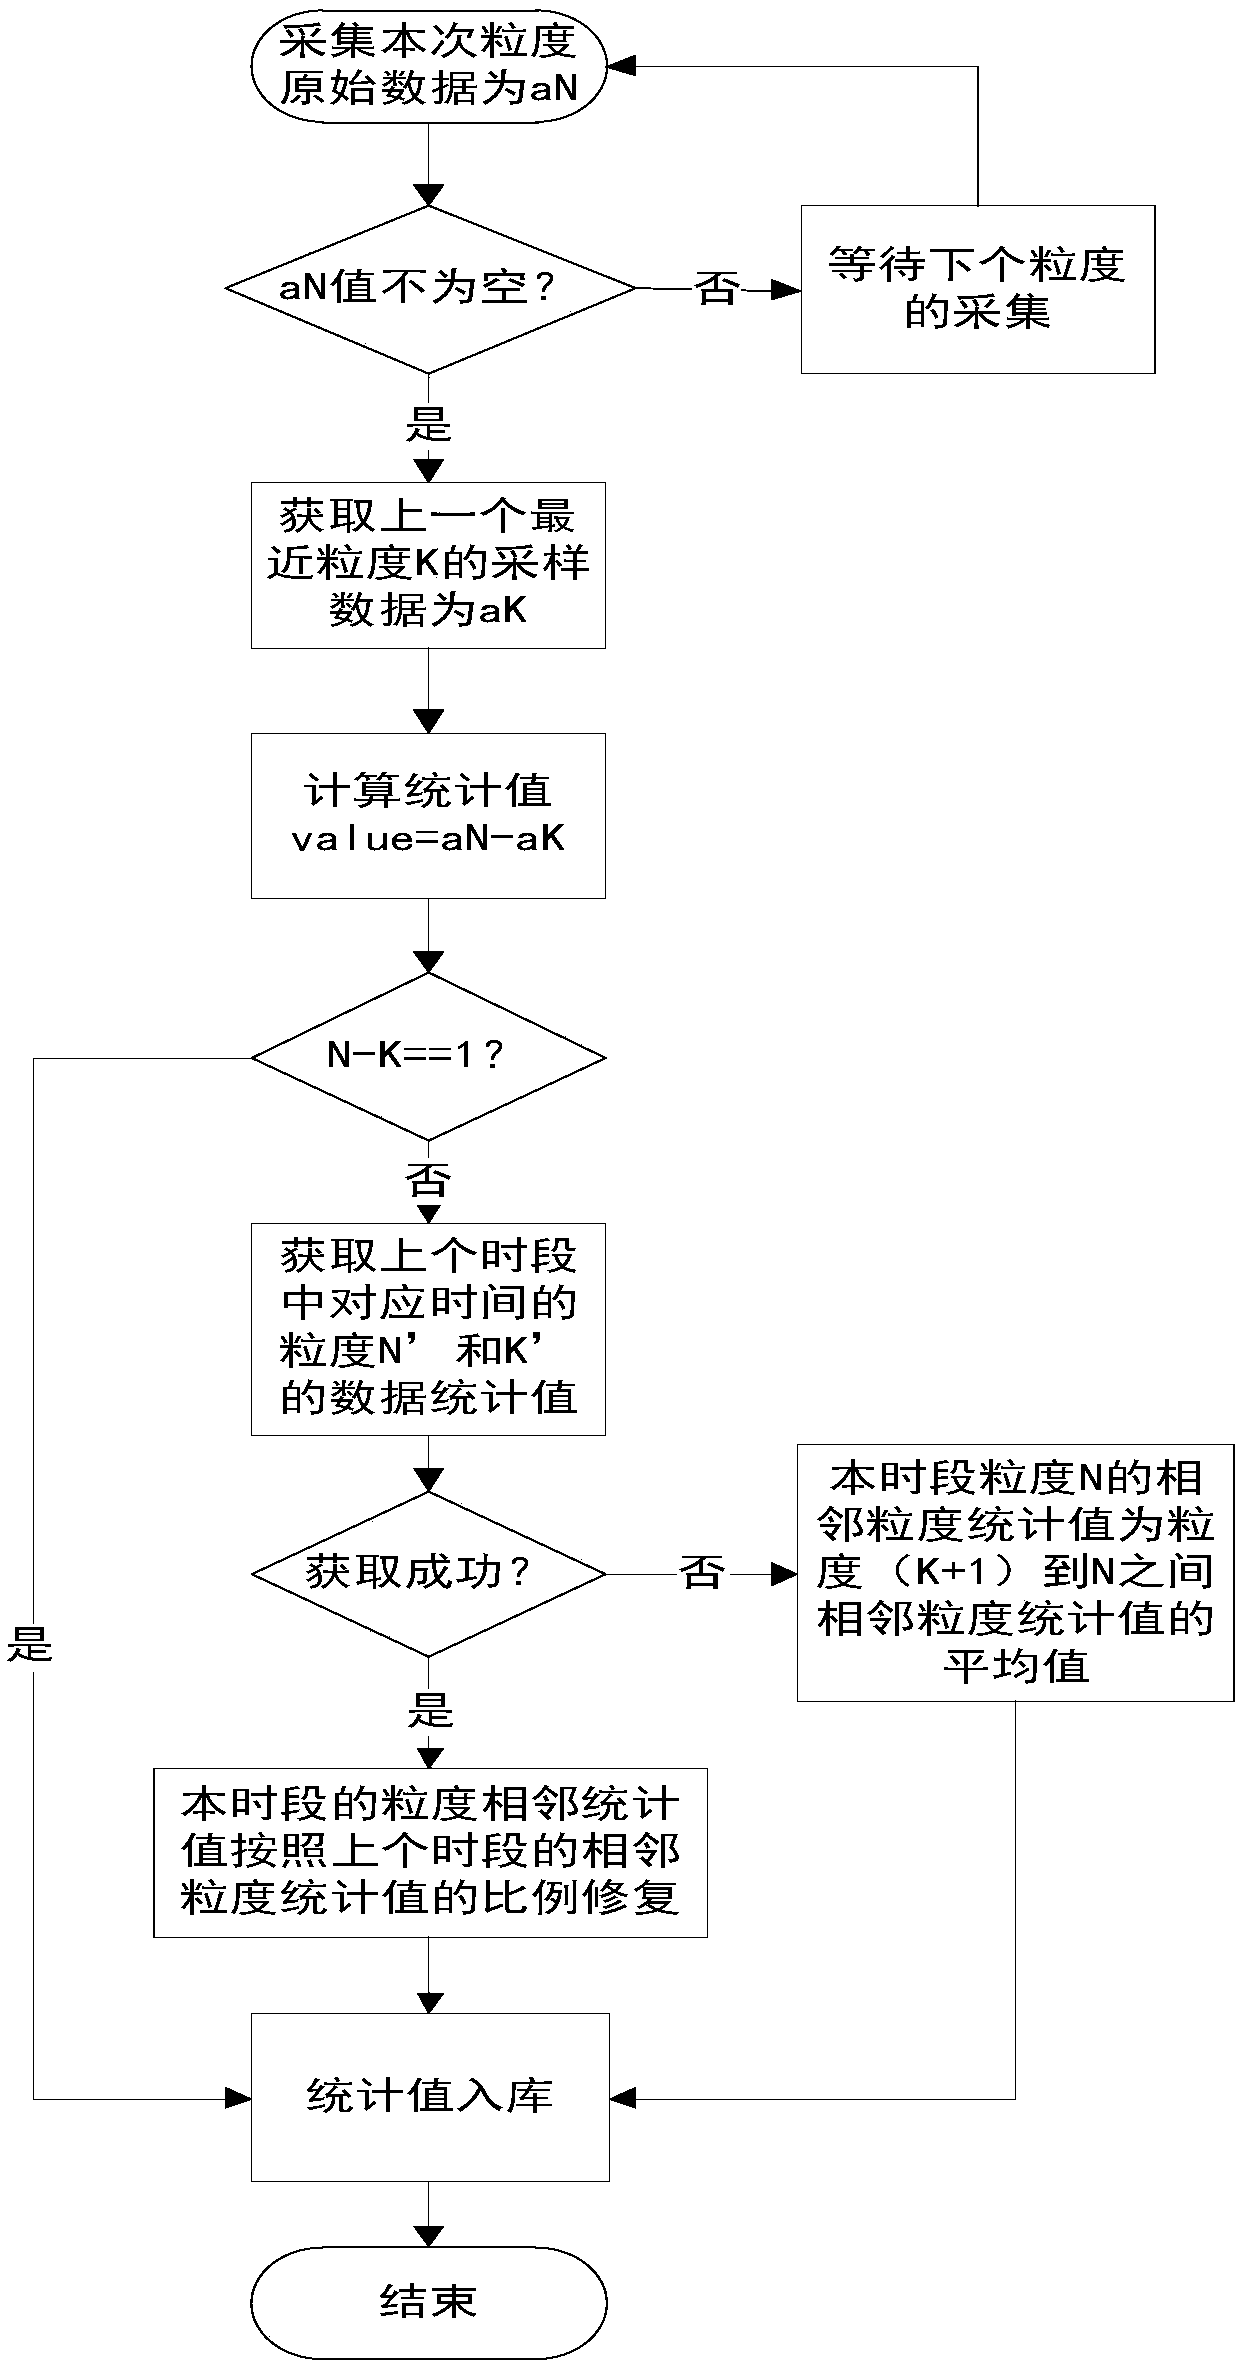 Method for data exception judgment and repairing on the basis of energy statistics